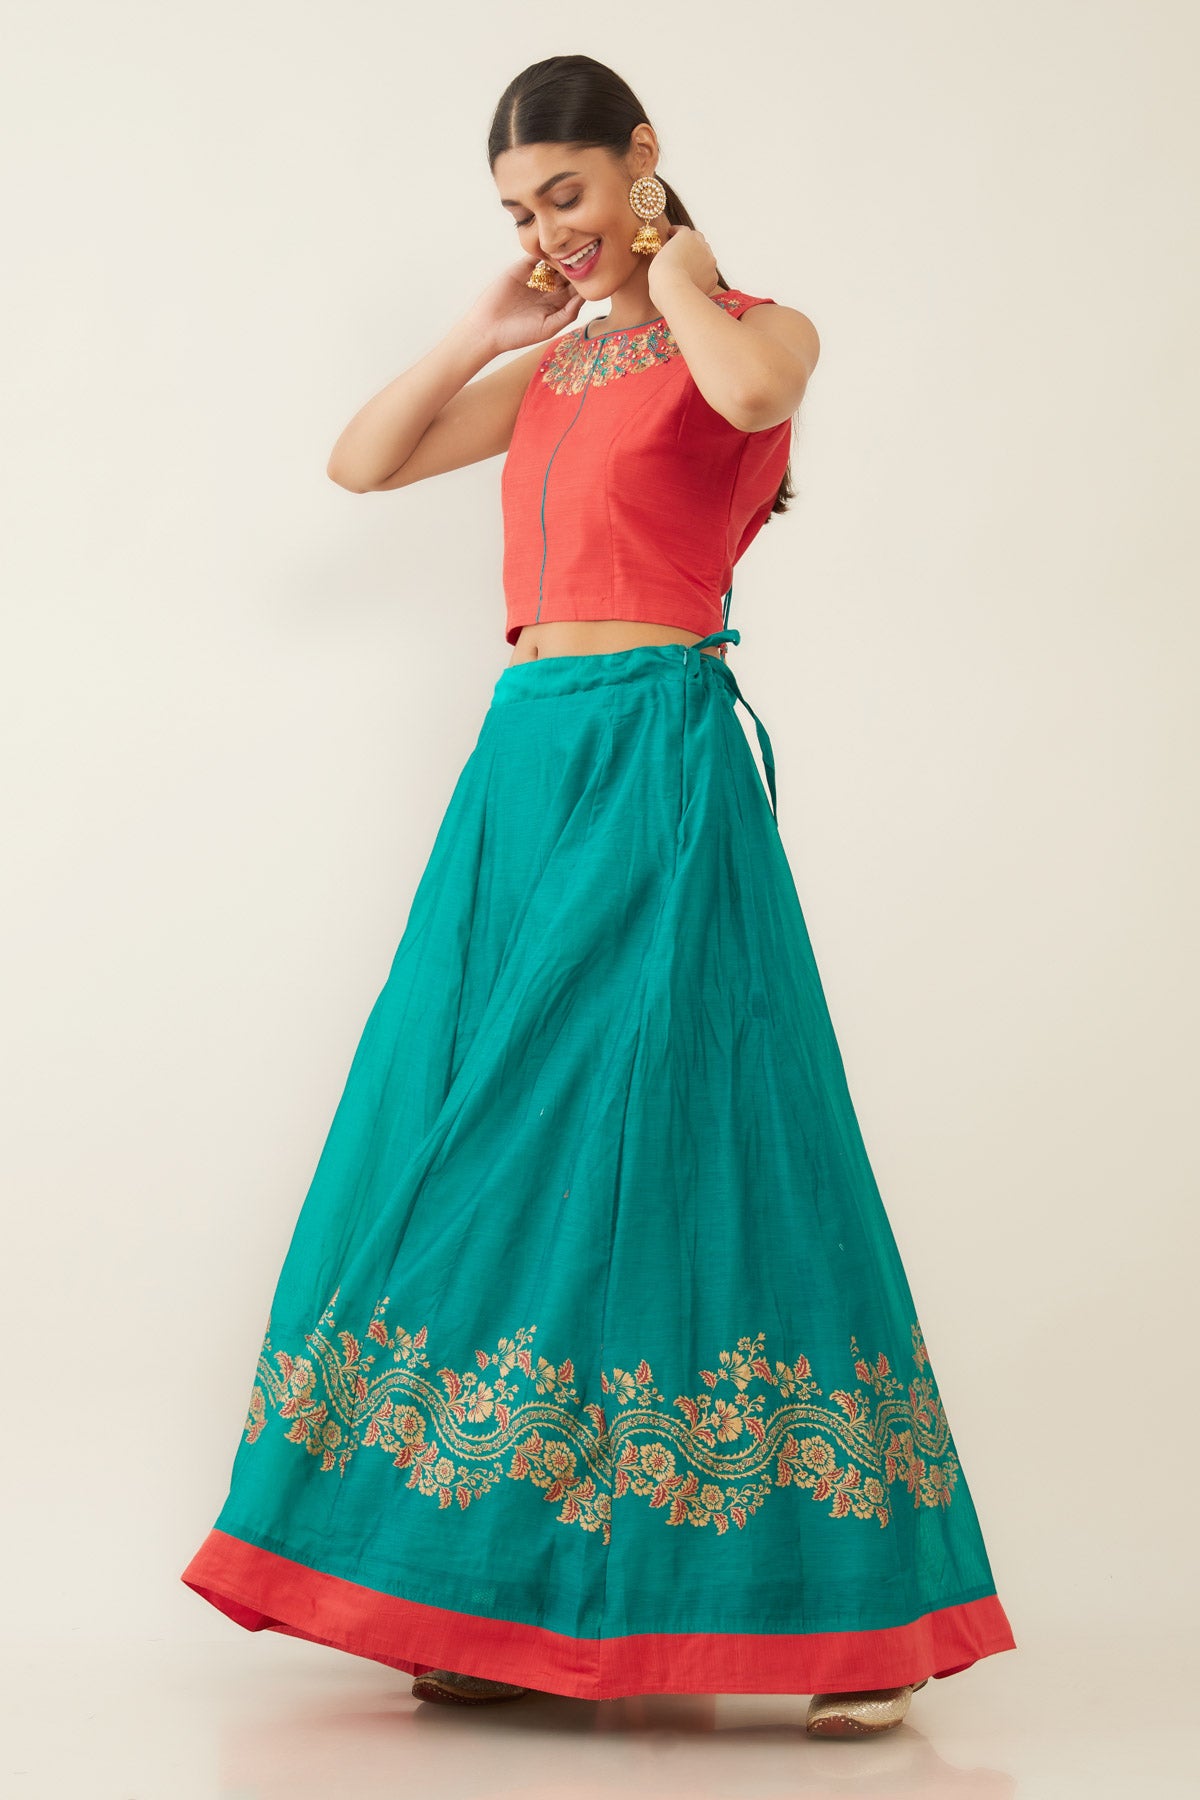 ETHNIC FLORAL PRINTED SKIRT WITH EMBROIDERED TOP - PEACH & TEAL GREEN